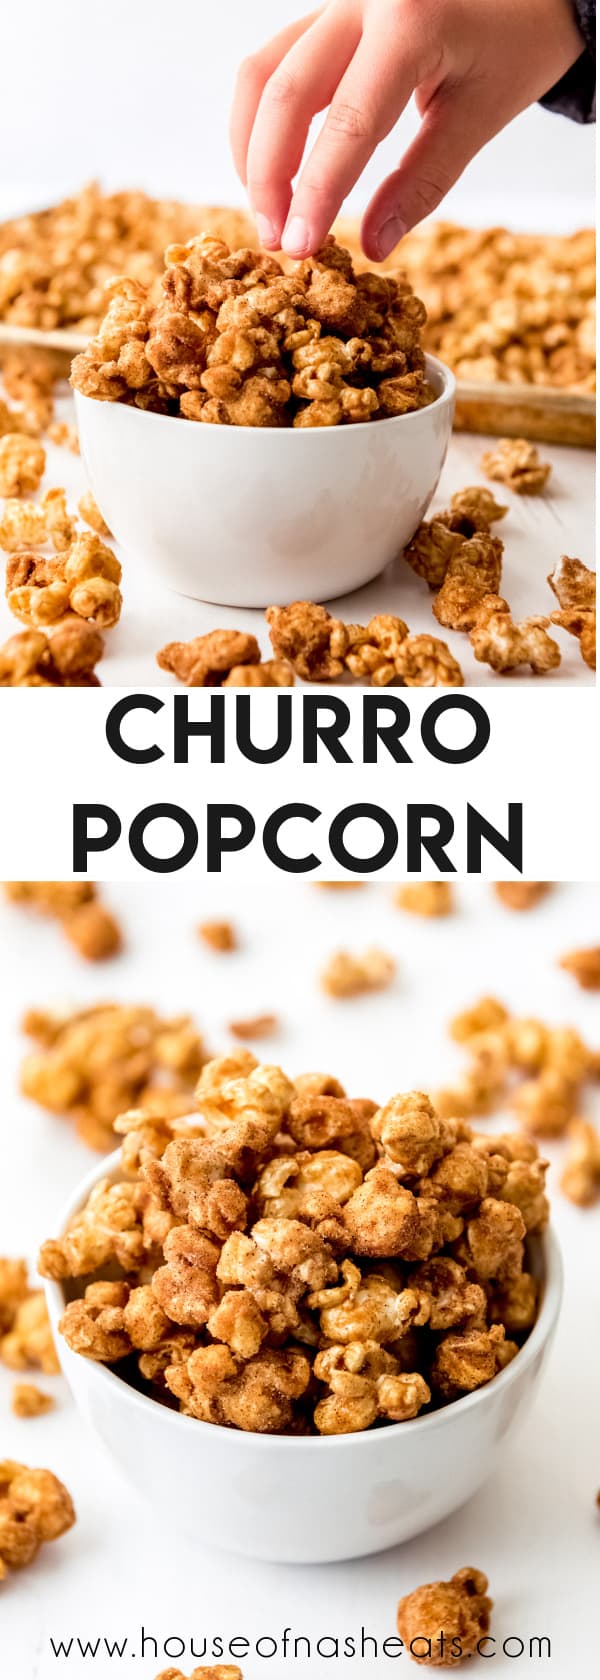 A collage of images of churro popcorn with text overlay.